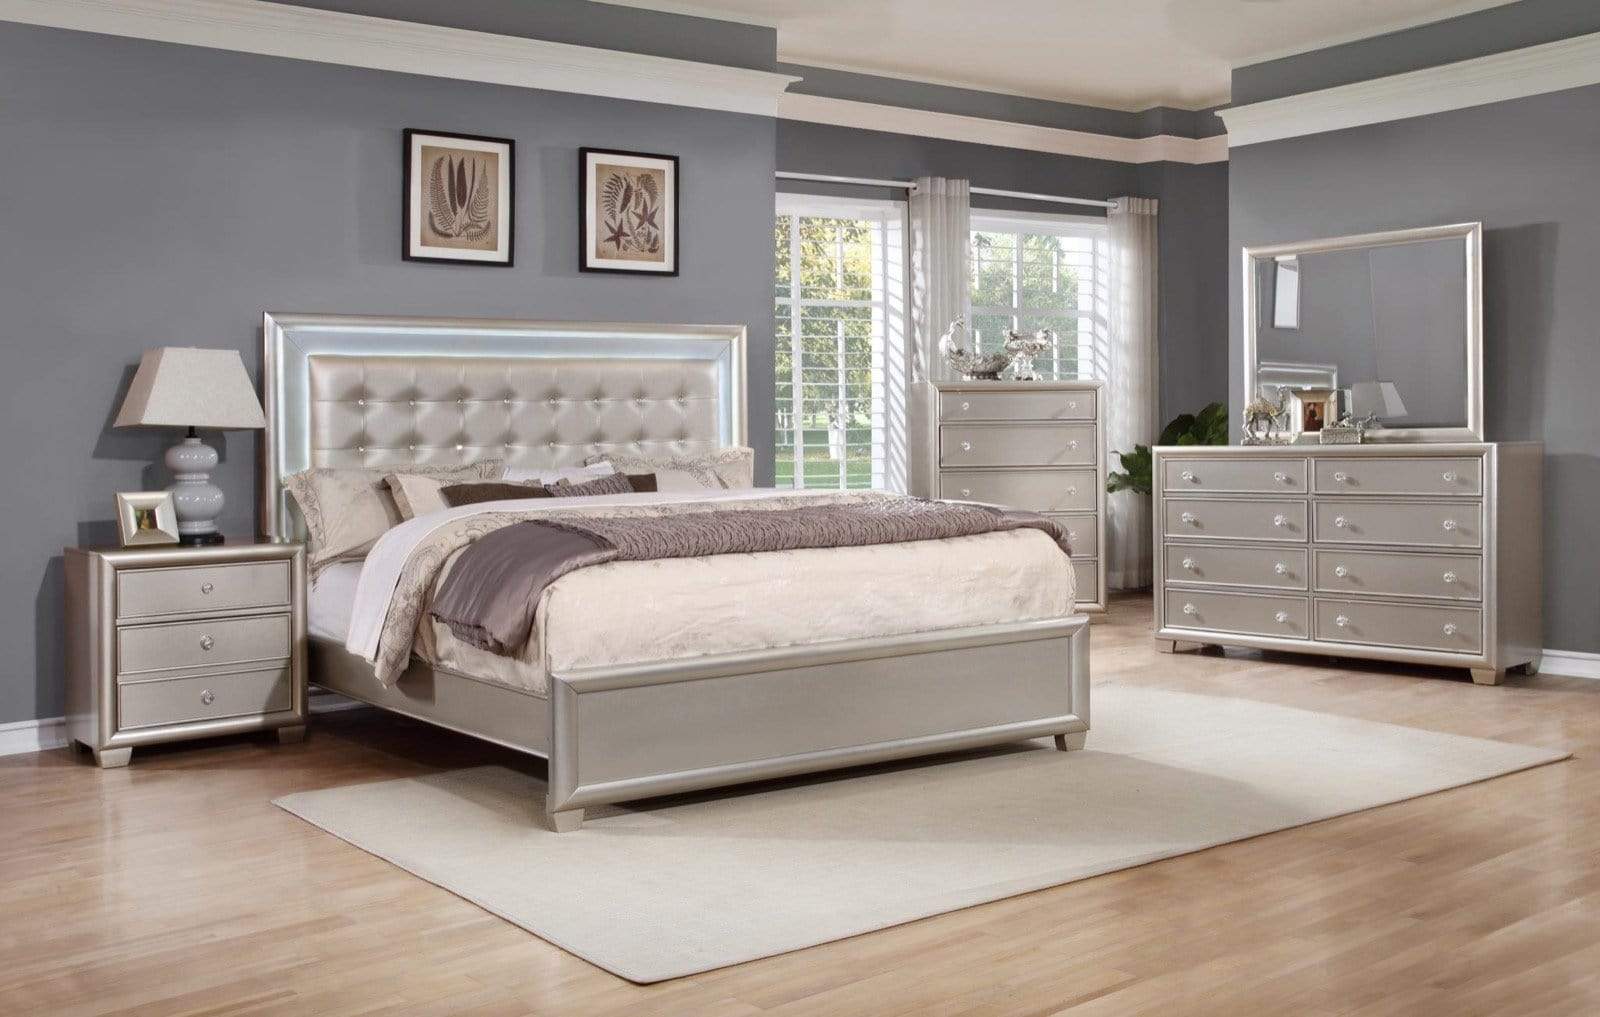 Mariano Bedroom Set | By MYCO at ASY Furniture